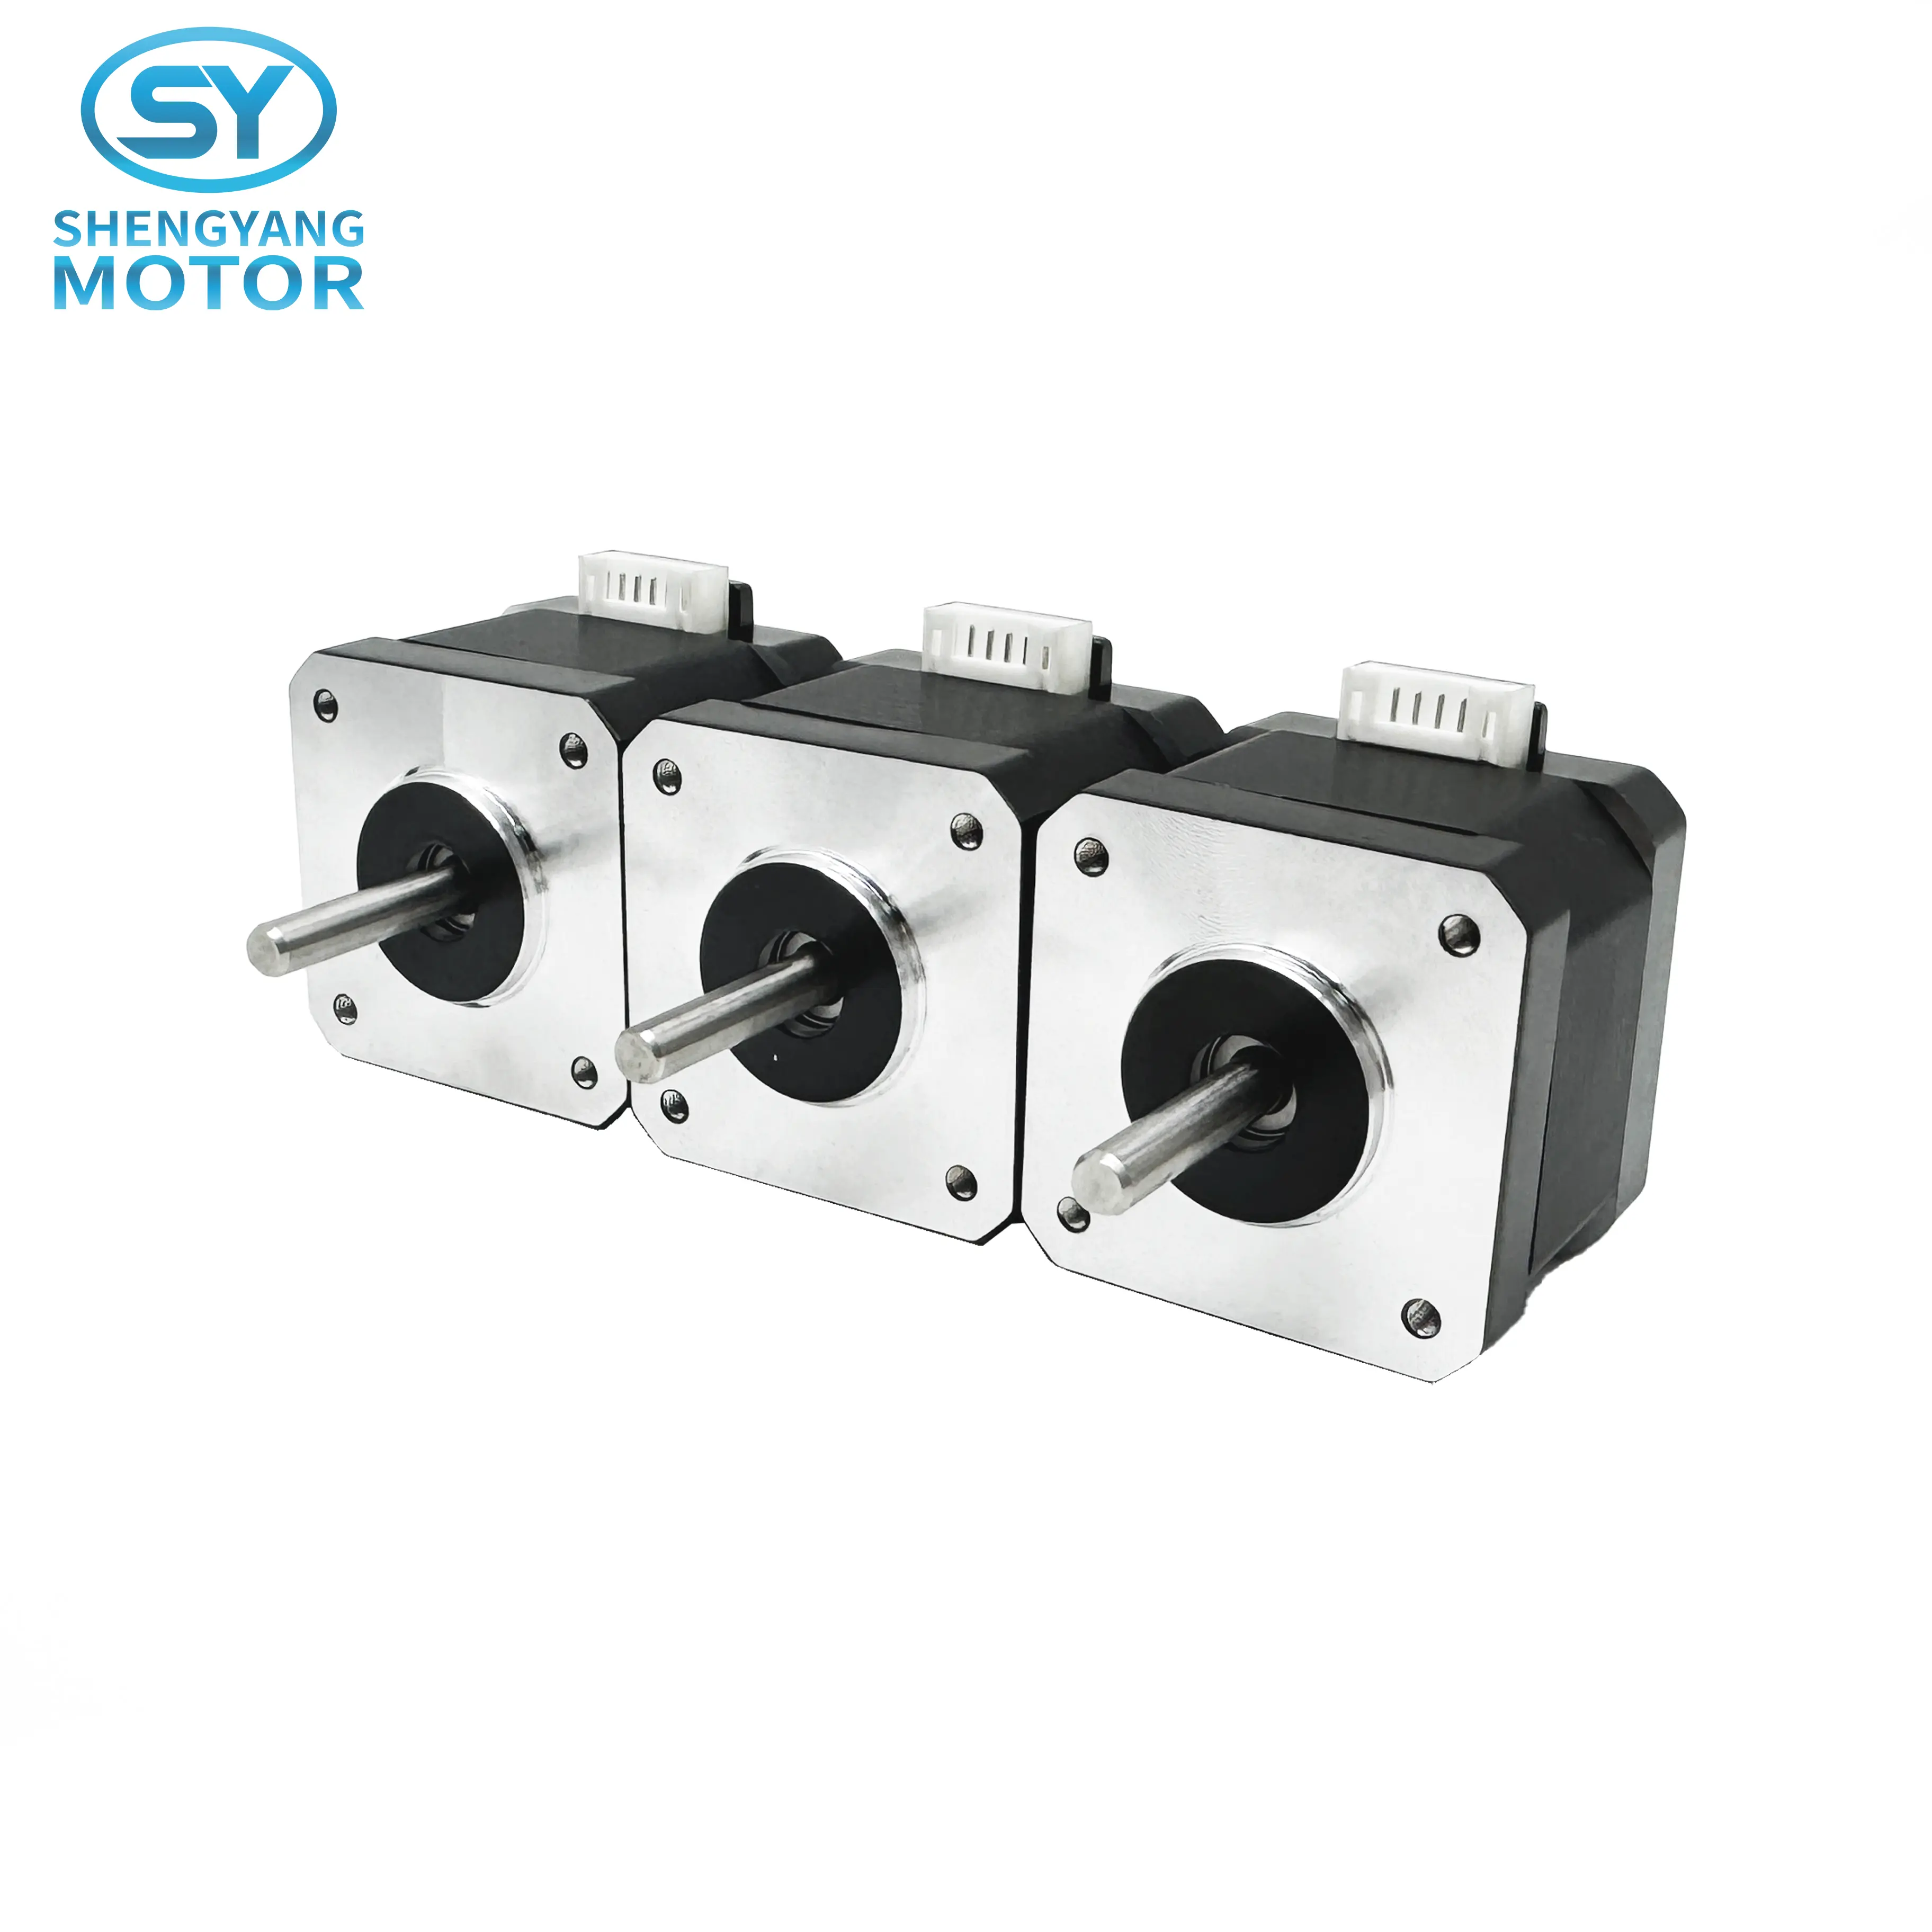 Low Cost Smooth Inventory Nema 17 Stepper Motor for 3D Printer